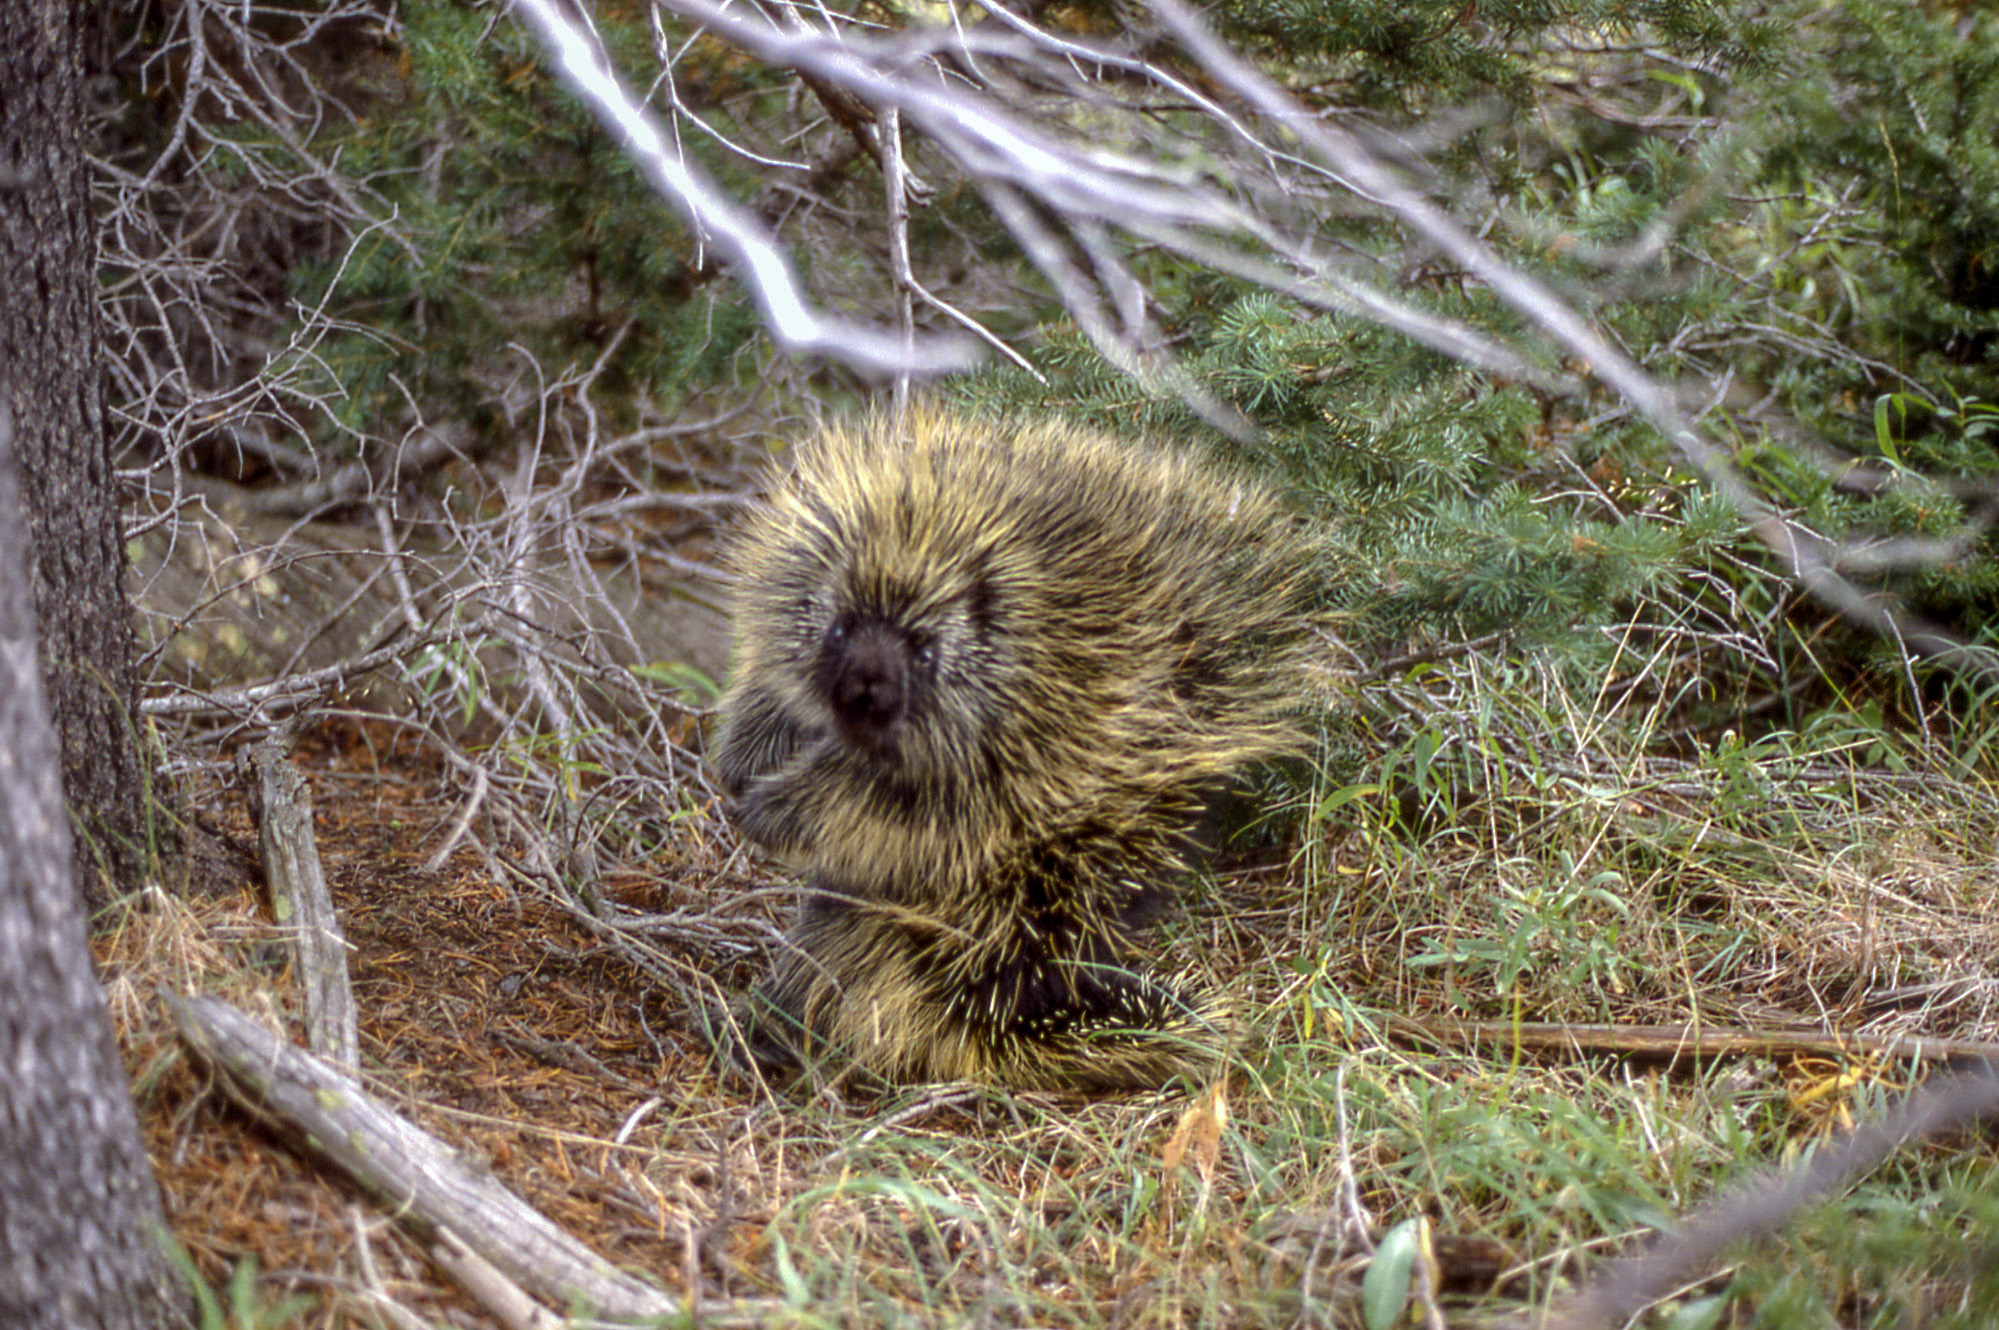 Full porcupine on the forest floor looking towards camera.